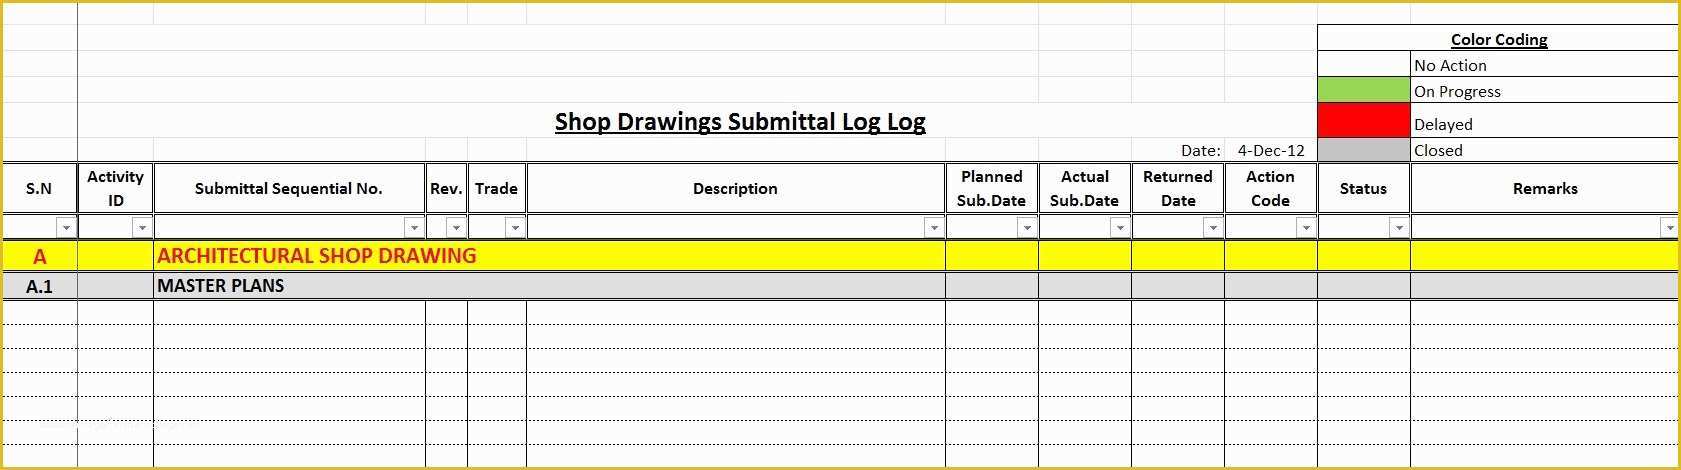 Free Construction Submittal Log Template Of How to Create A Shop Drawings Log with Sample File